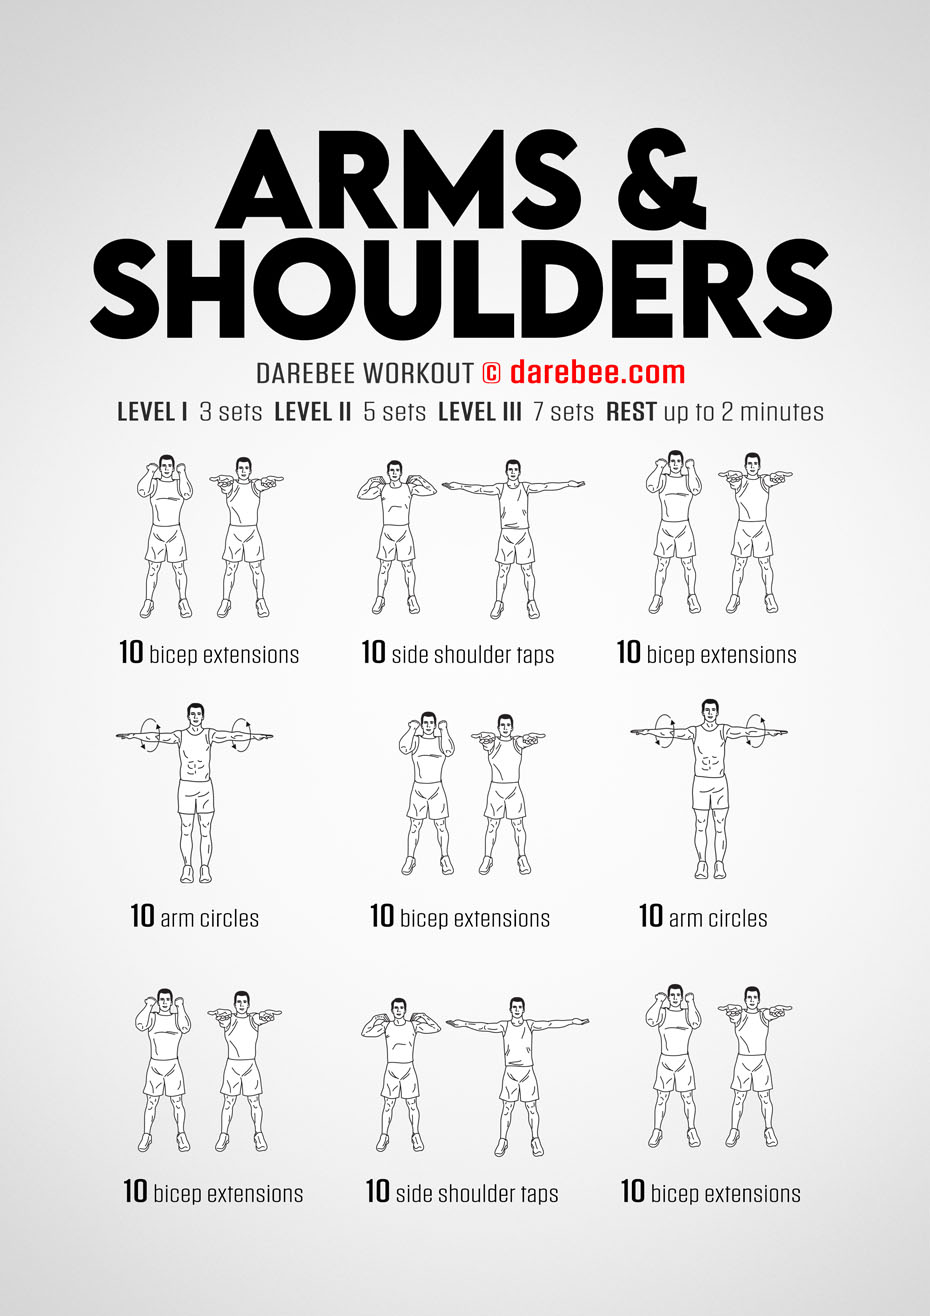 Arms & Shoulders is a DAREBEE beginners home fitness routine that focuses on upper body strength and fitness and needs no equipment to perform.